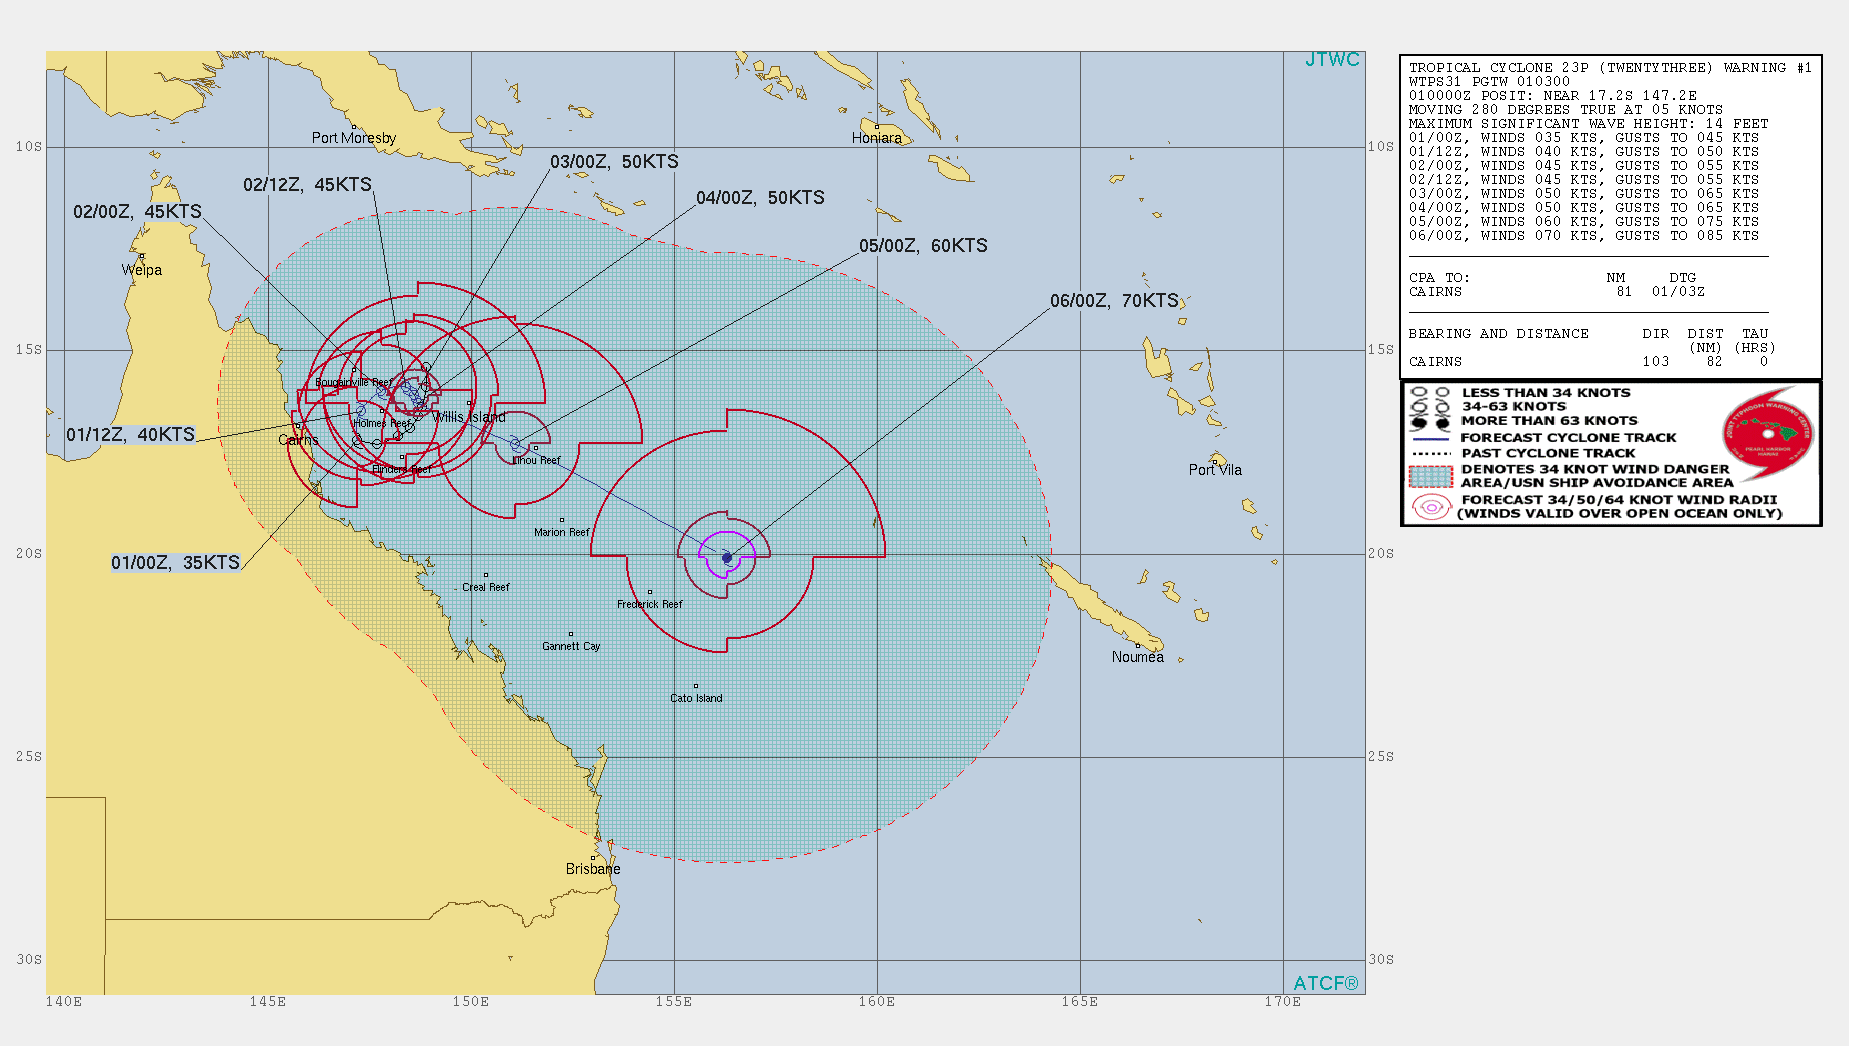 23P. WARNING 1 ISSUED AT 01/03UTC.ENVIRONMENTAL ANALYSIS DEPICTS A MARGINAL ENVIRONMENT WITH THE  MODERATE TO STRONG WIND SHEAR OFFSET BY ROBUST POLEWARD OUTFLOW AND WARM  SST VALUES (30C). THE CURRENT STEERING ENVIRONMENT IS VERY COMPLEX  WITH A STRONG SUBTROPICAL RIDGE (STR) OVER EASTERN AUSTRALIA AND  ANOTHER STR EAST AND SOUTH OF THE SYSTEM. ADDITIONALLY, A STRONG  NEAR-EQUATORIAL RIDGE IS ENTRENCHED NORTH OF THE SYSTEM.  CONSEQUENTLY, TC 23P IS BOXED IN AND THE TRACK MOTION IS EXPECTED TO  BE SLOW, LIMITED AND ERRATIC THROUGH 72H DUE TO A COMBINATION OF  THESE STEERING INFLUENCES. THE JTWC FORECAST TRACK INDICATES A  CLOCKWISE LOOP WHICH IS IN LINE WITH THE BULK OF THE NUMERICAL MODEL  GUIDANCE THROUGH 72H. THERE IS OBVIOUSLY HIGH UNCERTAINTY (LOW  CONFIDENCE) IN THE TRACK DUE TO THE AFOREMENTIONED COMPLEX STEERING  ENVIRONMENT. WIND SHEAR WILL DECREASE THUS THE SYSTEM IS FORECAST TO  GRADUALLY INTENSIFY 72H. AFTER 72H, A MAJOR  MIDLATITUDE TROUGH IS FORECAST TO DEEPEN TO THE SOUTH, WHICH WILL  ERODE THE STR AND ALLOW THE SYSTEM TO ACCELERATE EAST-SOUTHEASTWARD  ALONG THE SOUTHERN PERIPHERY OF THE NEAR-EQUATORIAL RIDGE THROUGH  THE REMAINDER OF THE PERIOD. THIS TROUGH WILL ALSO IMPROVE POLEWARD  VENTING WHICH WILL LEAD TO A SHARPER INTENSIFICATION RATE WITH A  PEAK INTENSITY OF 70 KNOTS/US CATEGORY 1 ANTICIPATED BY 120H.